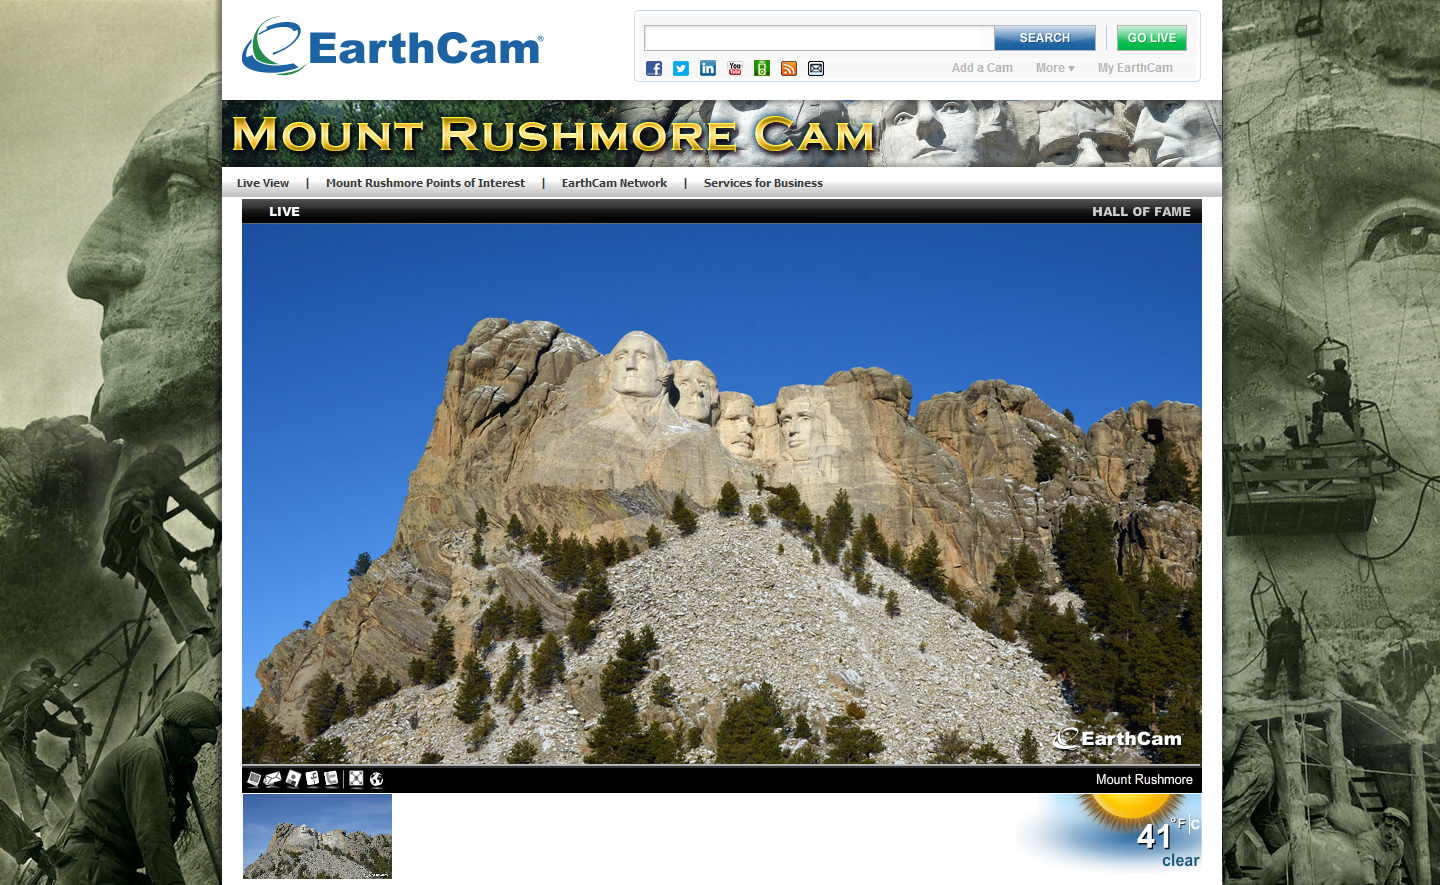 EarthCam's Mount Rushmore webcam transports viewers to the Black Hills of South Dakota.